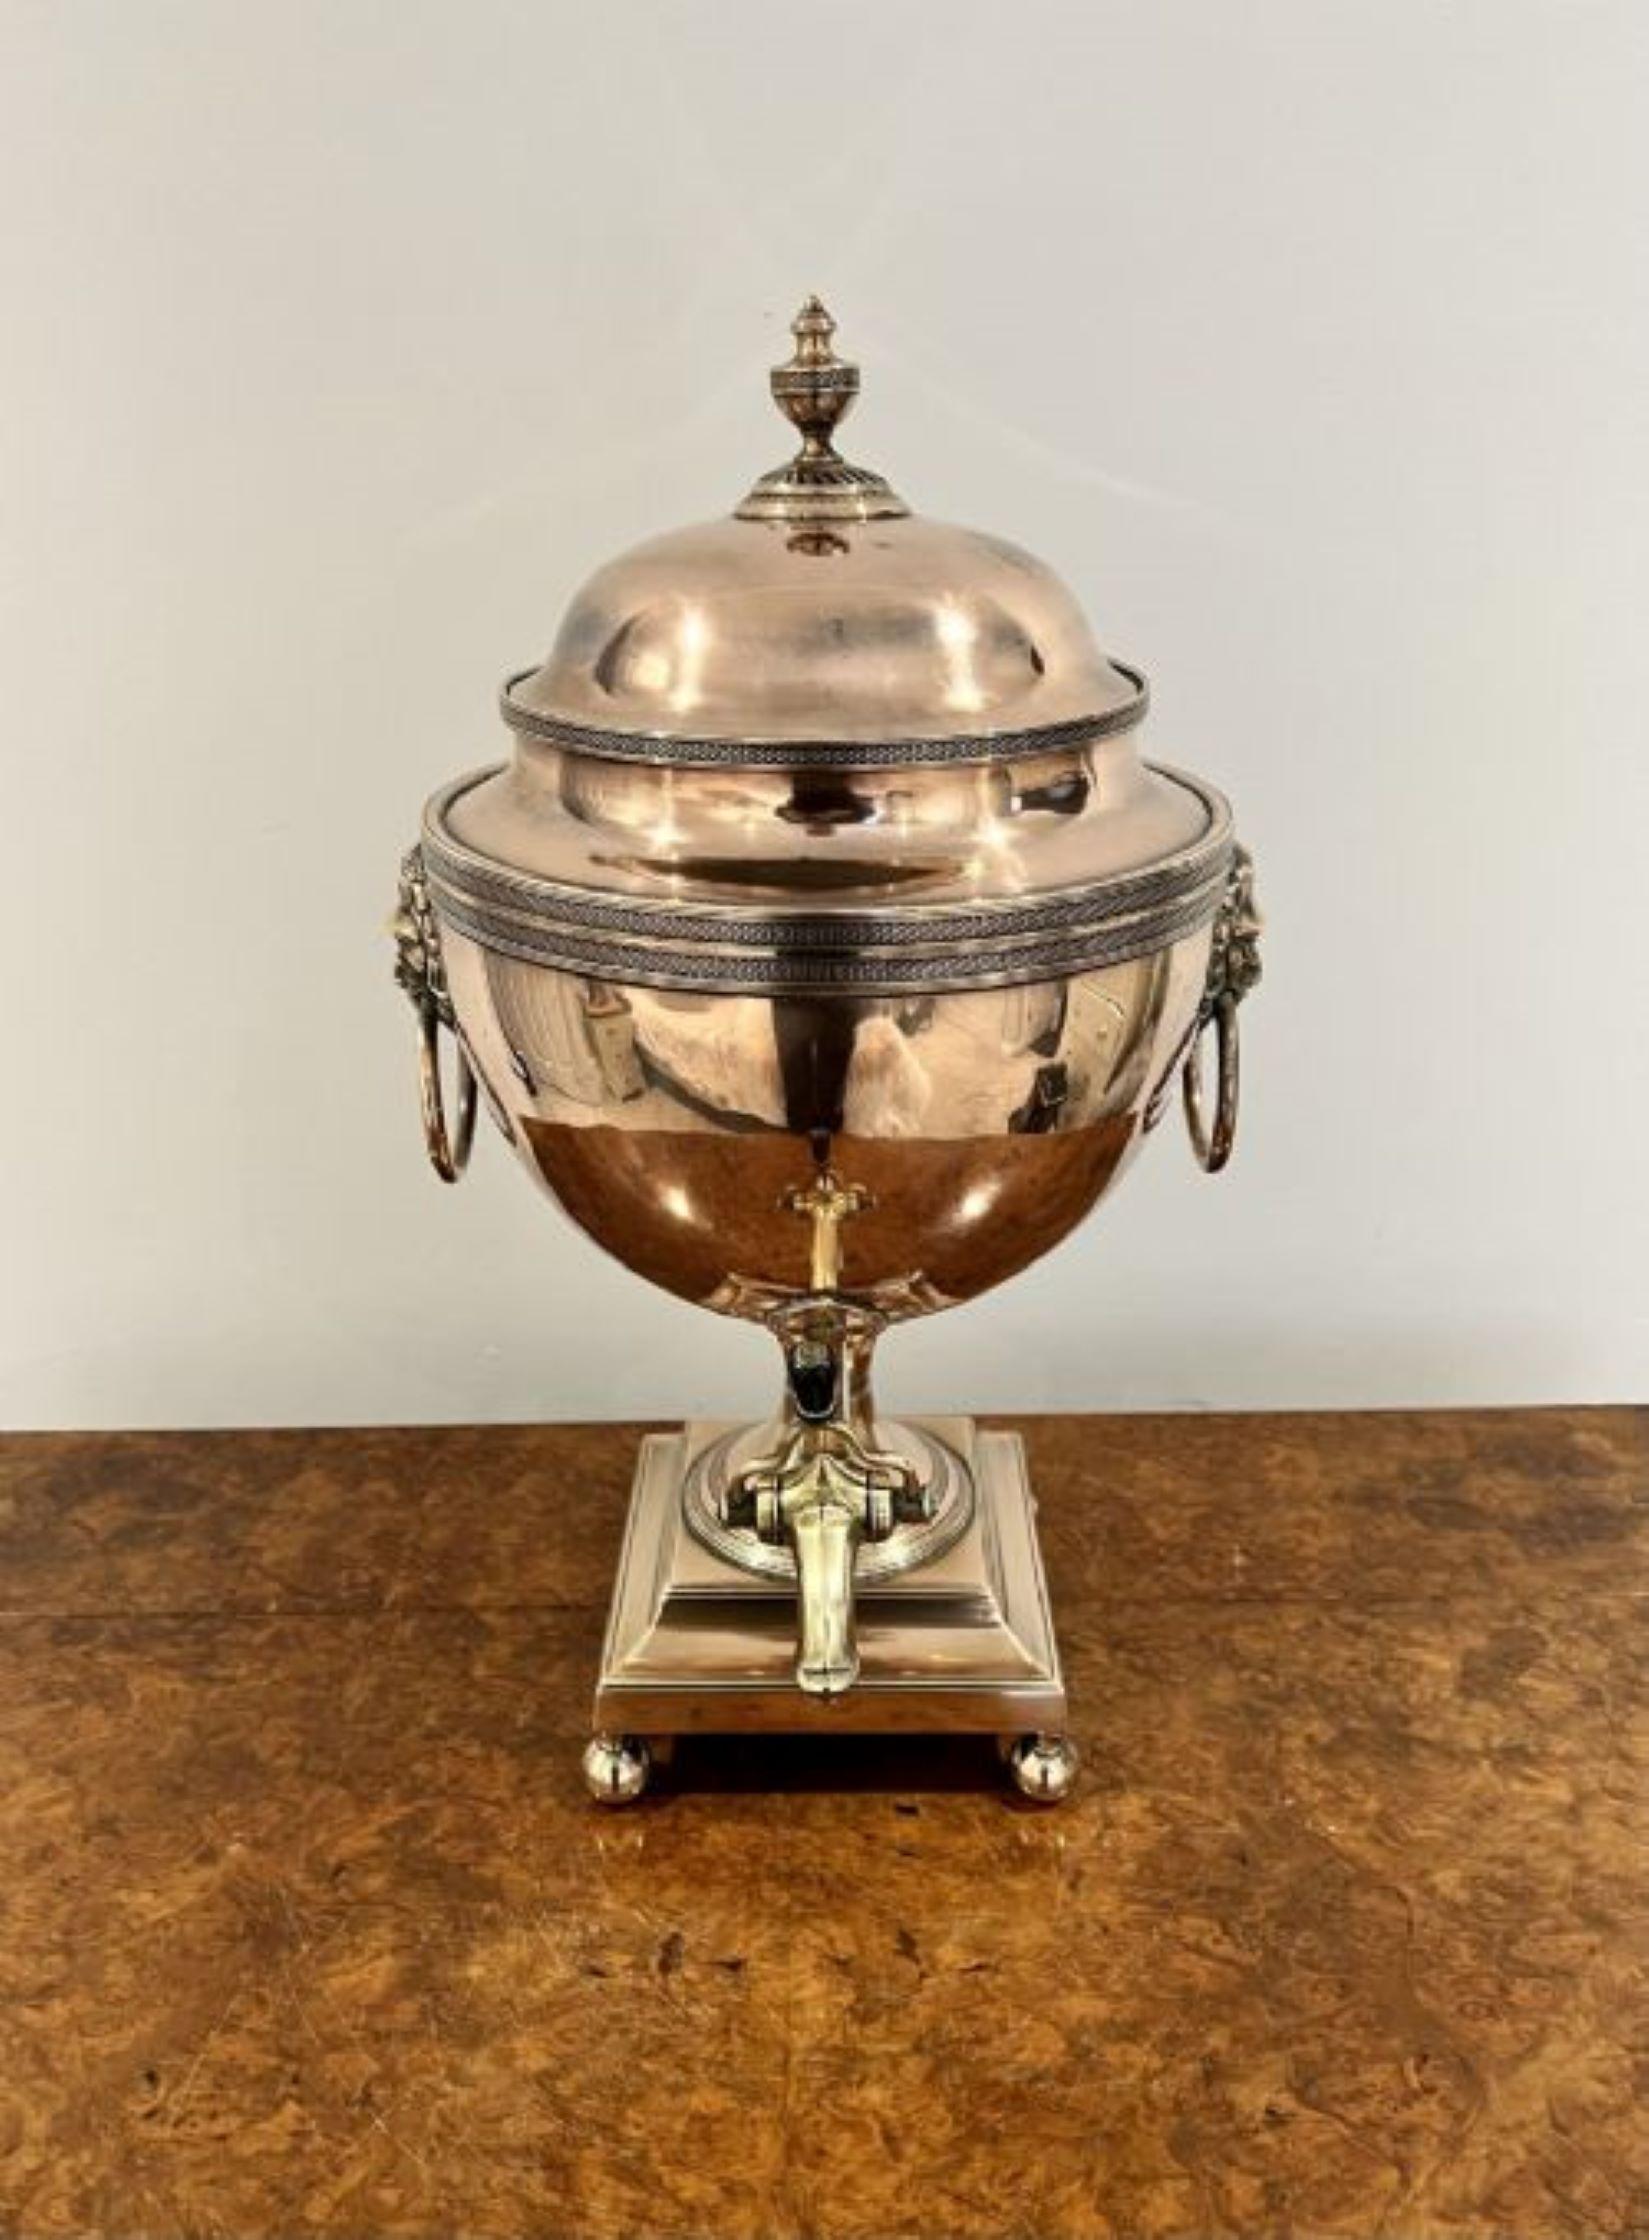 Fine quality antique George III large copper samovar having a quality George III large copper samovar with engraved decoration having a lift off lid, fantastic lions head ring carrying handles to the sides, a brass tap to the front standing on a